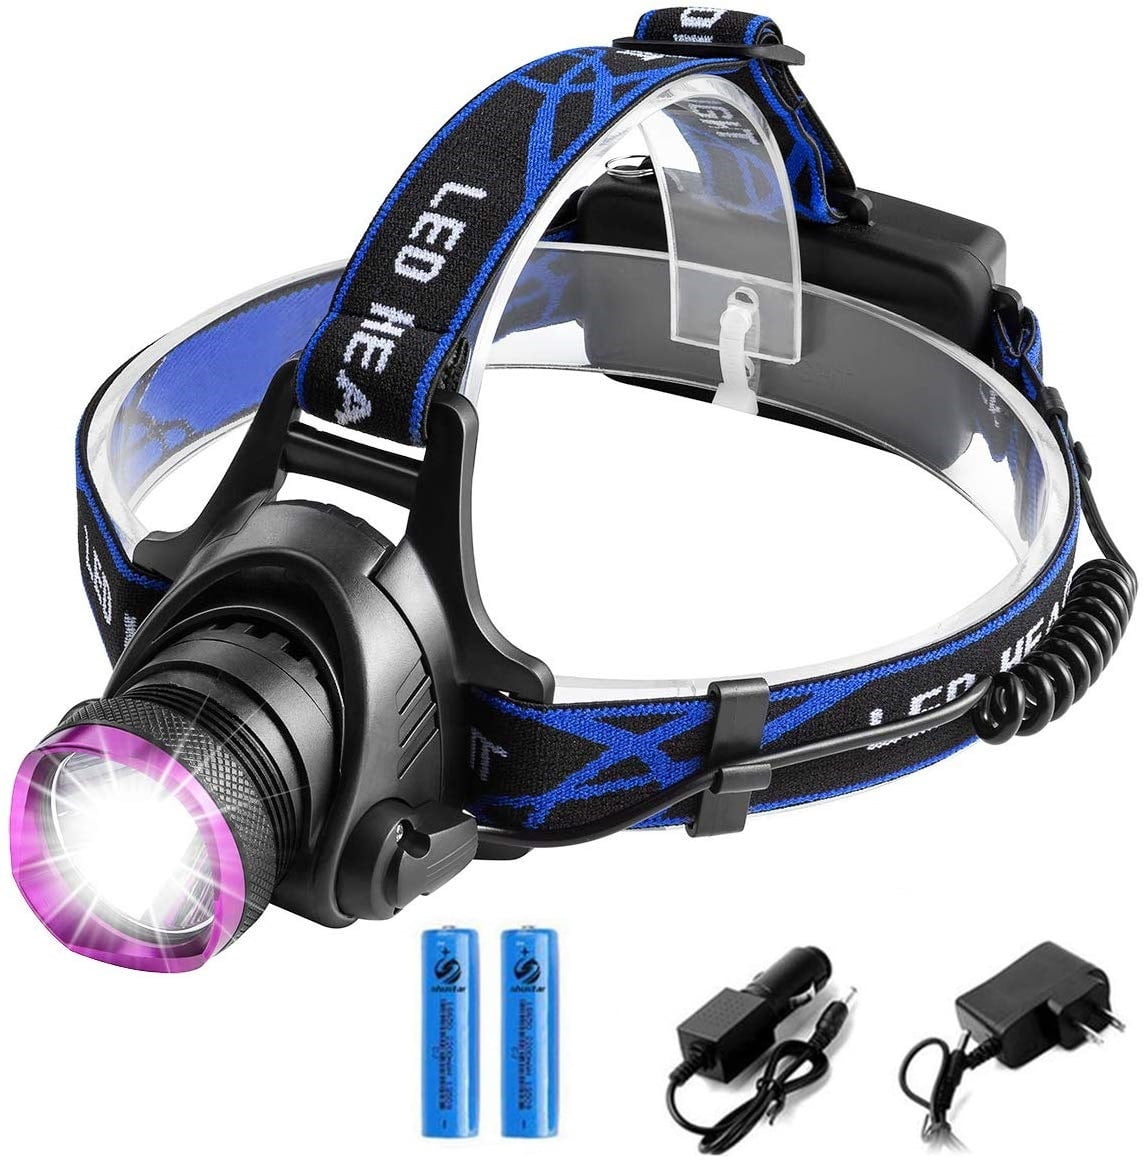 Led Rechargeable Headlamp, Brightest Head Lamp, 5000 Lumen Headlamp  Flashlight, Running Headlight, Modes Waterproof Torch Head With Batteries  for Camping Hiking Cycling Outdoors